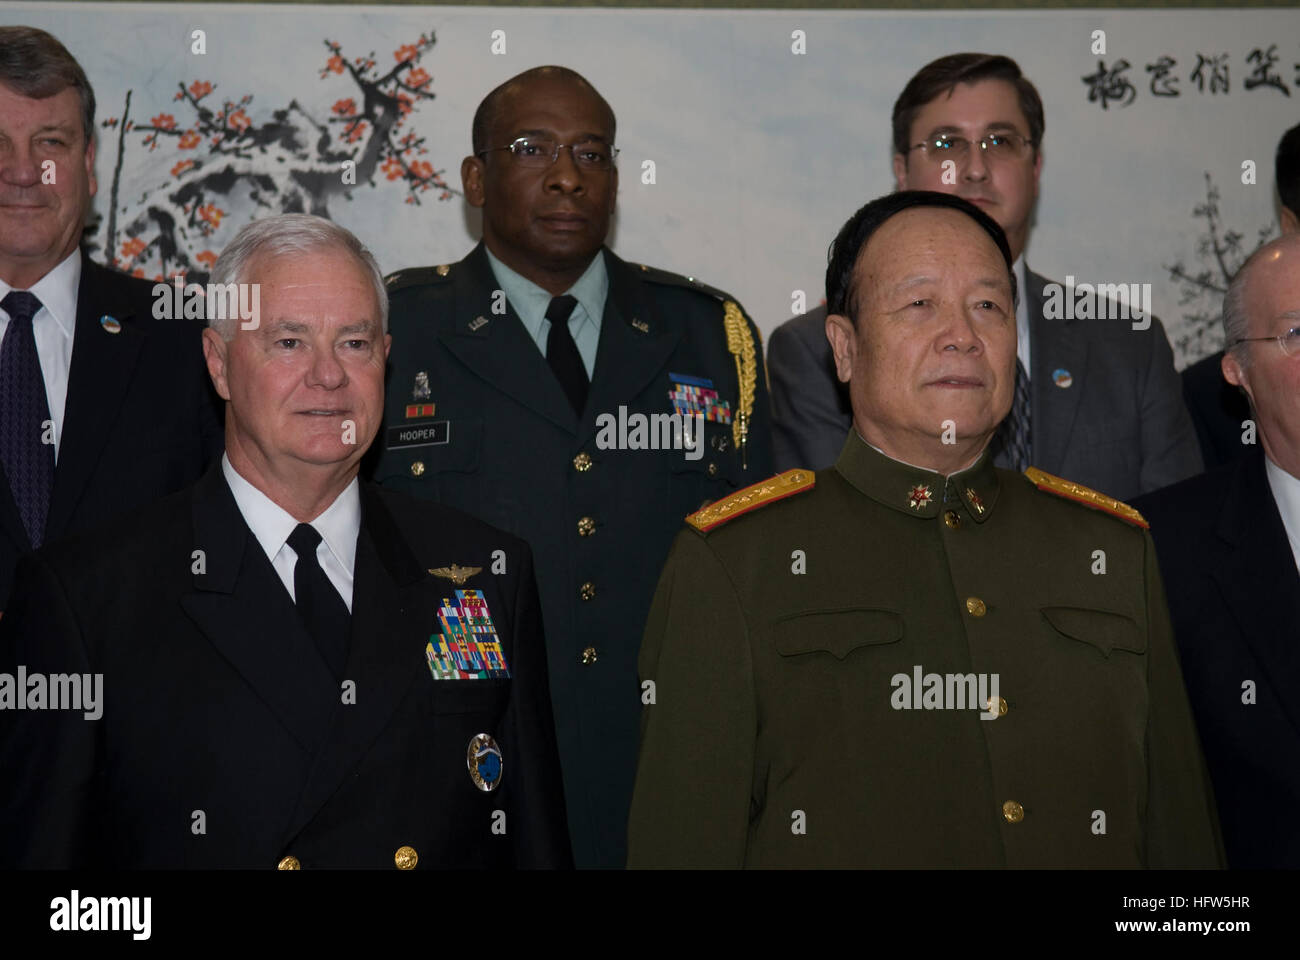 080114-N-8623G-032 BEIJING (Jan. 14, 2008) Adm. Timothy J. Keating, commander of U.S. Pacific Command, and Gen. Guo Boxiong, vice chairman of the Chinese Central Military Commission, pose for a photo before a meeting with military and government officials. U.S. Navy photo by Mass Communication Specialist 2nd Class Elisia V. Gonzales (Released) US Navy 080114-N-8623G-032 Adm. Timothy J. Keating, commander of U.S. Pacific Command, and Gen. Guo Boxiong, vice chairman of the Chinese Central Military Commission, pose for a photo Stock Photo